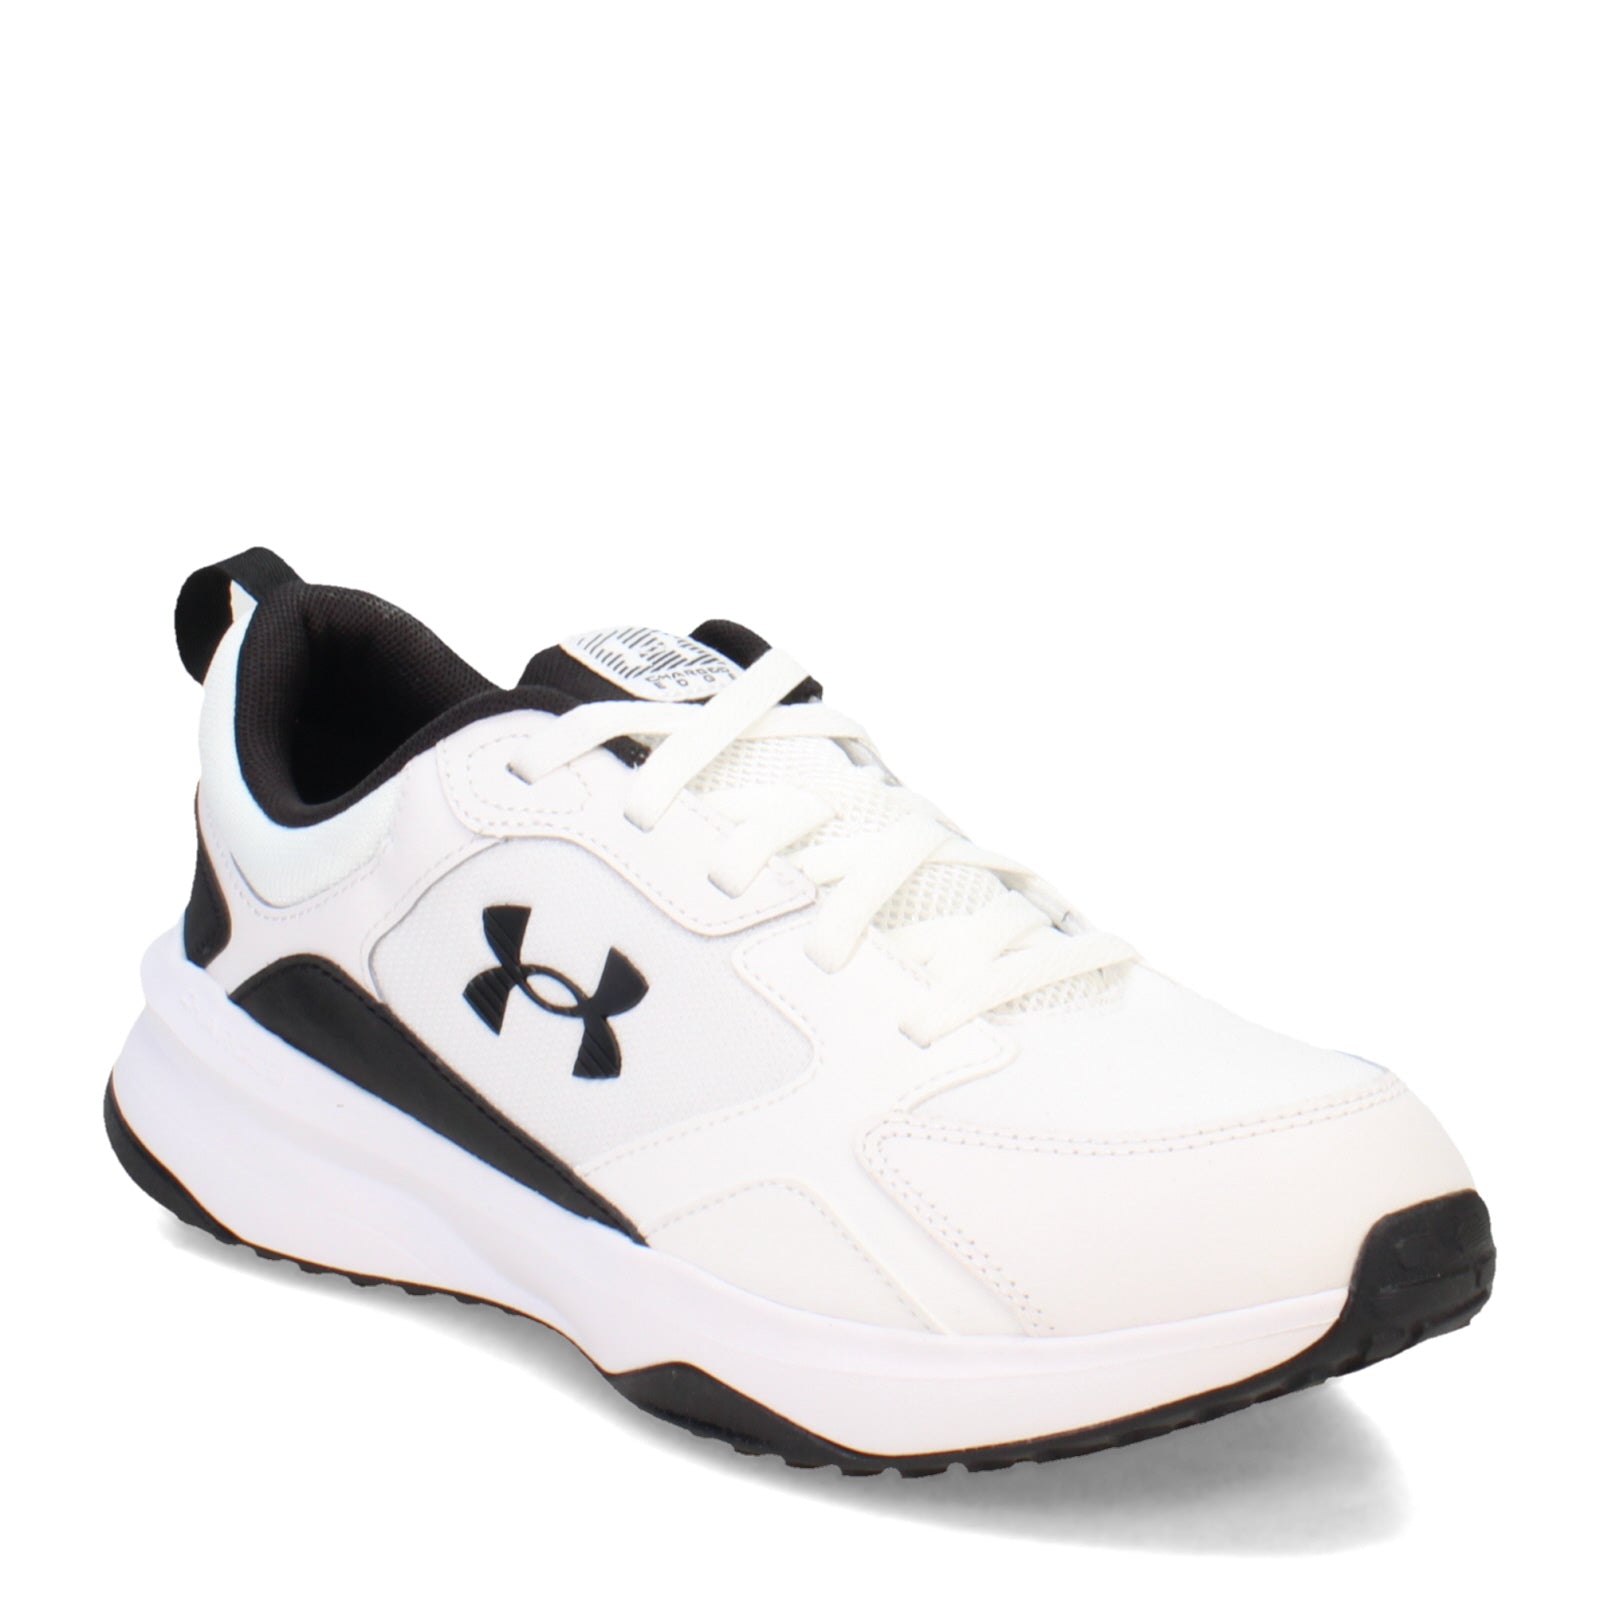 Men's Under Armour, Charged Edge Training Shoe - 4E Width